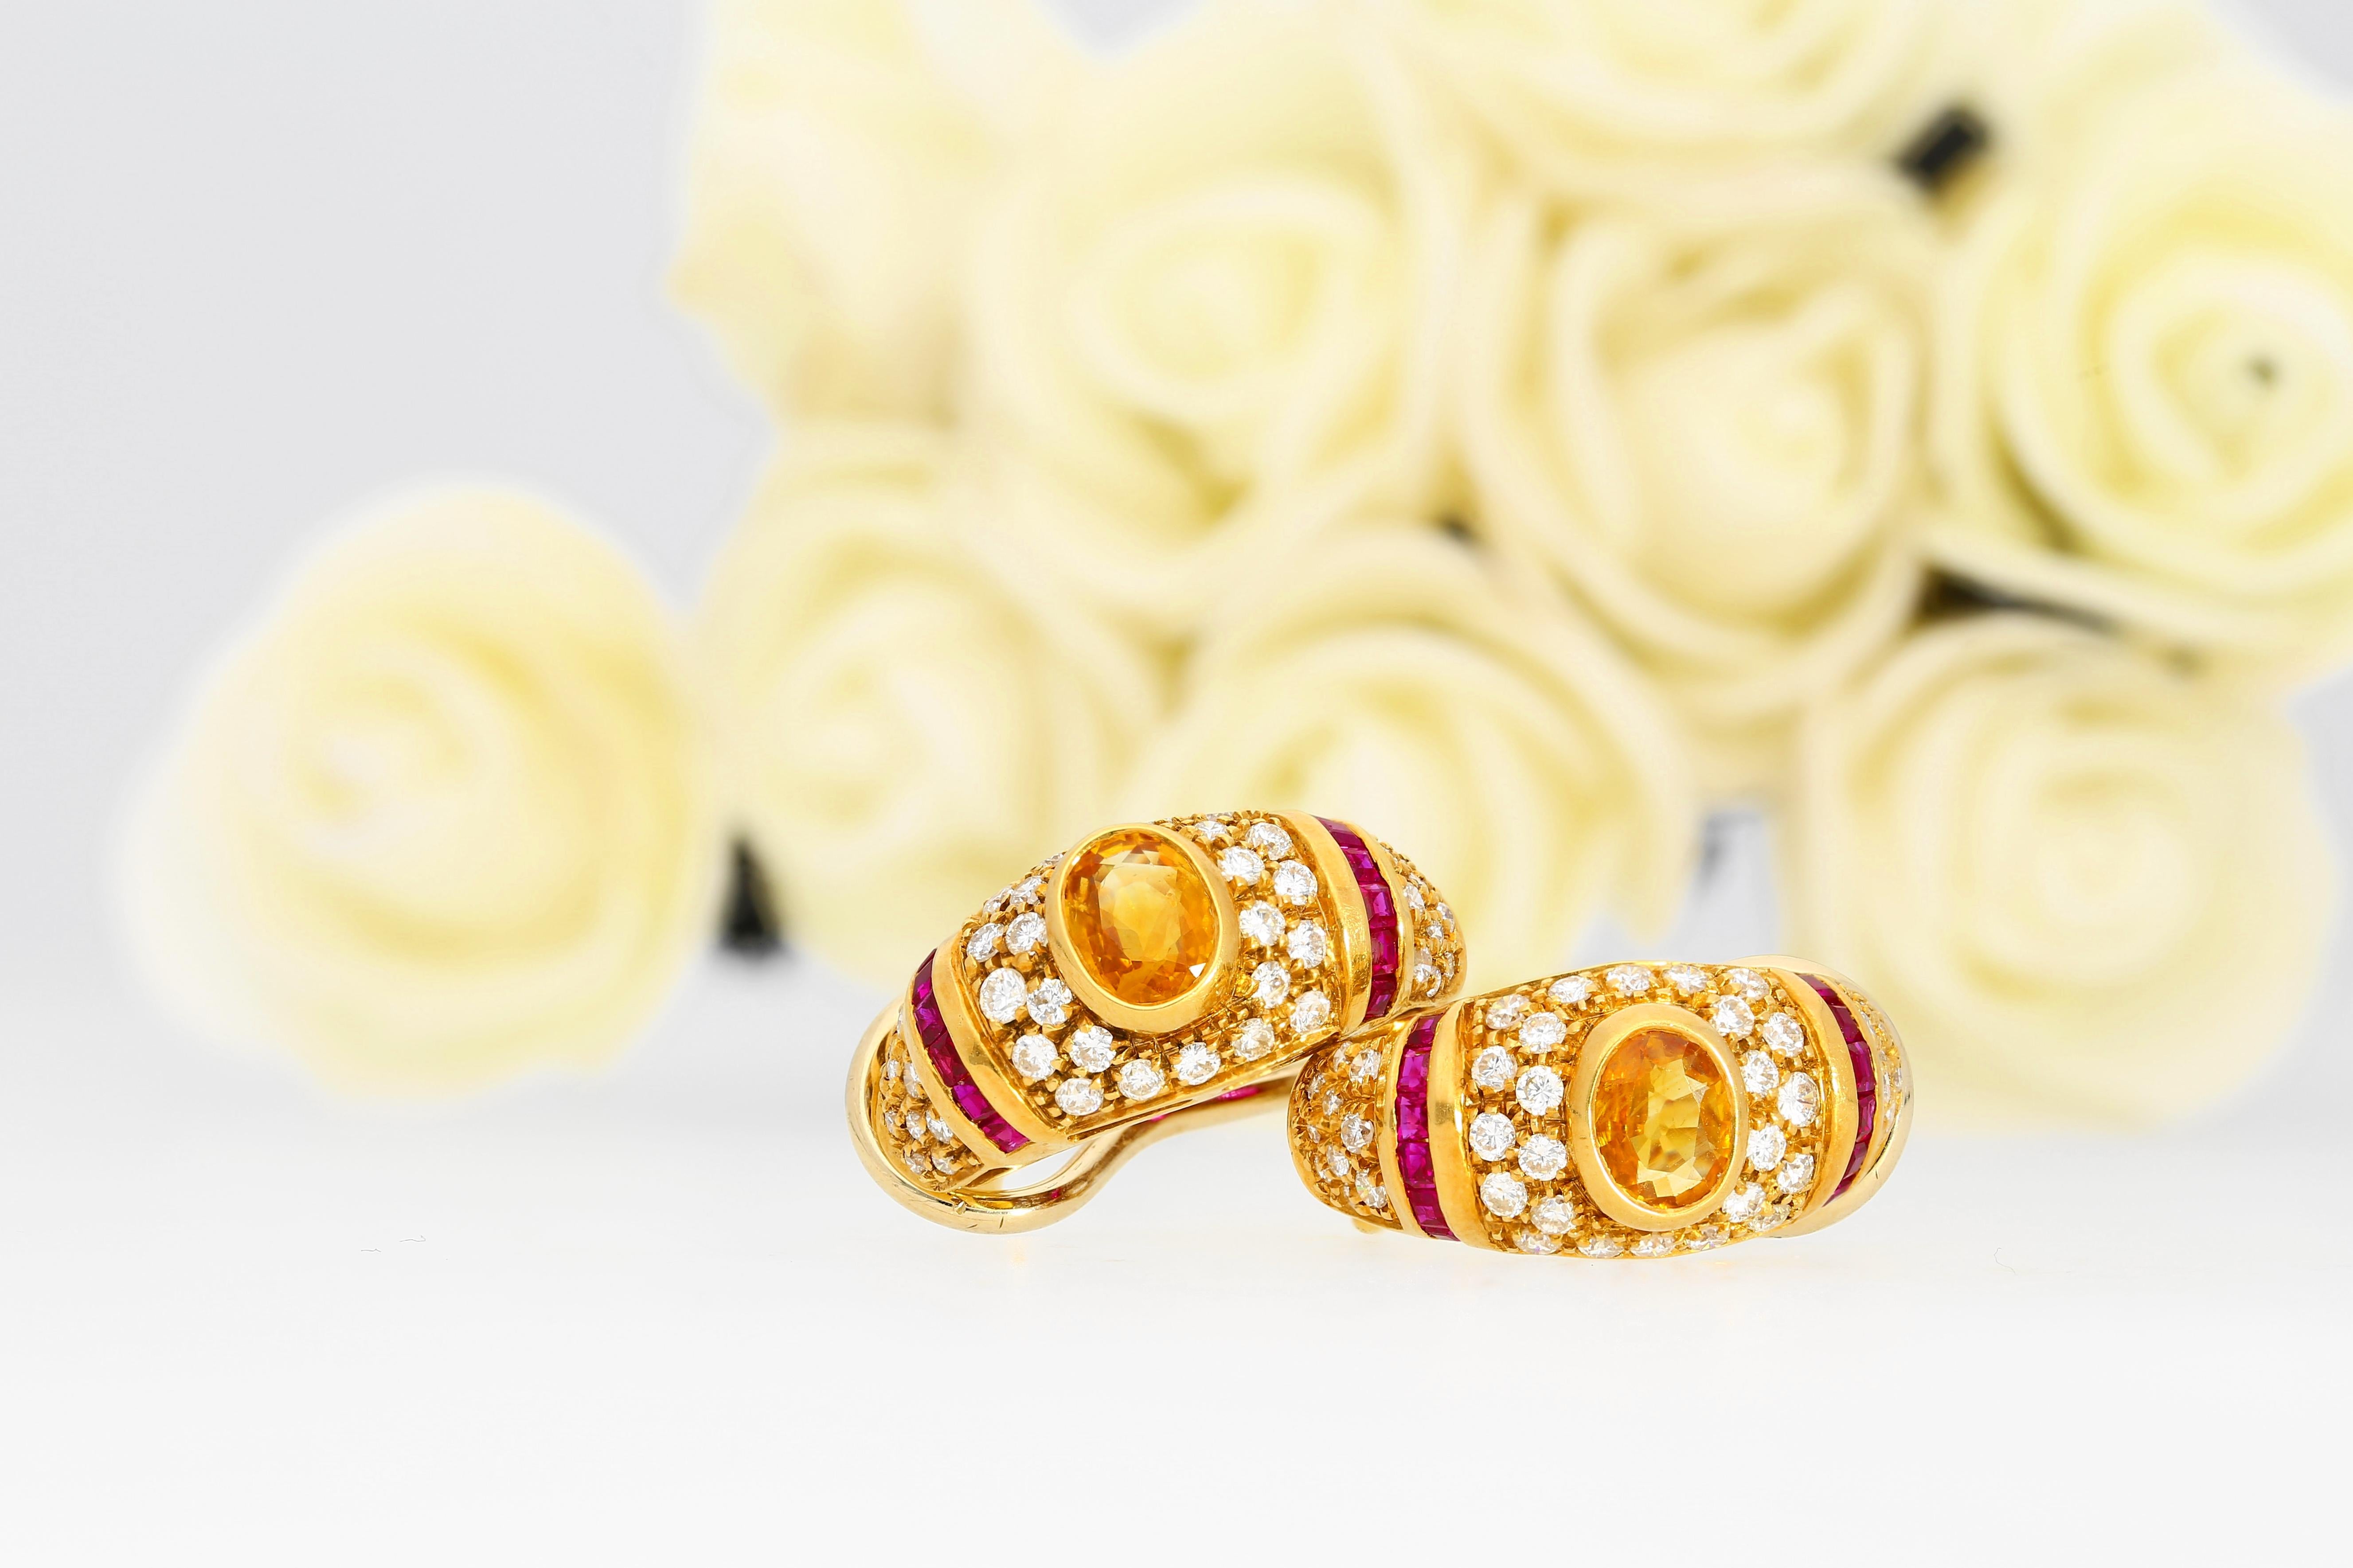 Centering 2 Oval-Cut Yellow Sapphires
Accented with 24 baguette-cut rubies and 88 round-brilliant cut diamonds
Set in 18k Yellow Gold - 8 grams
